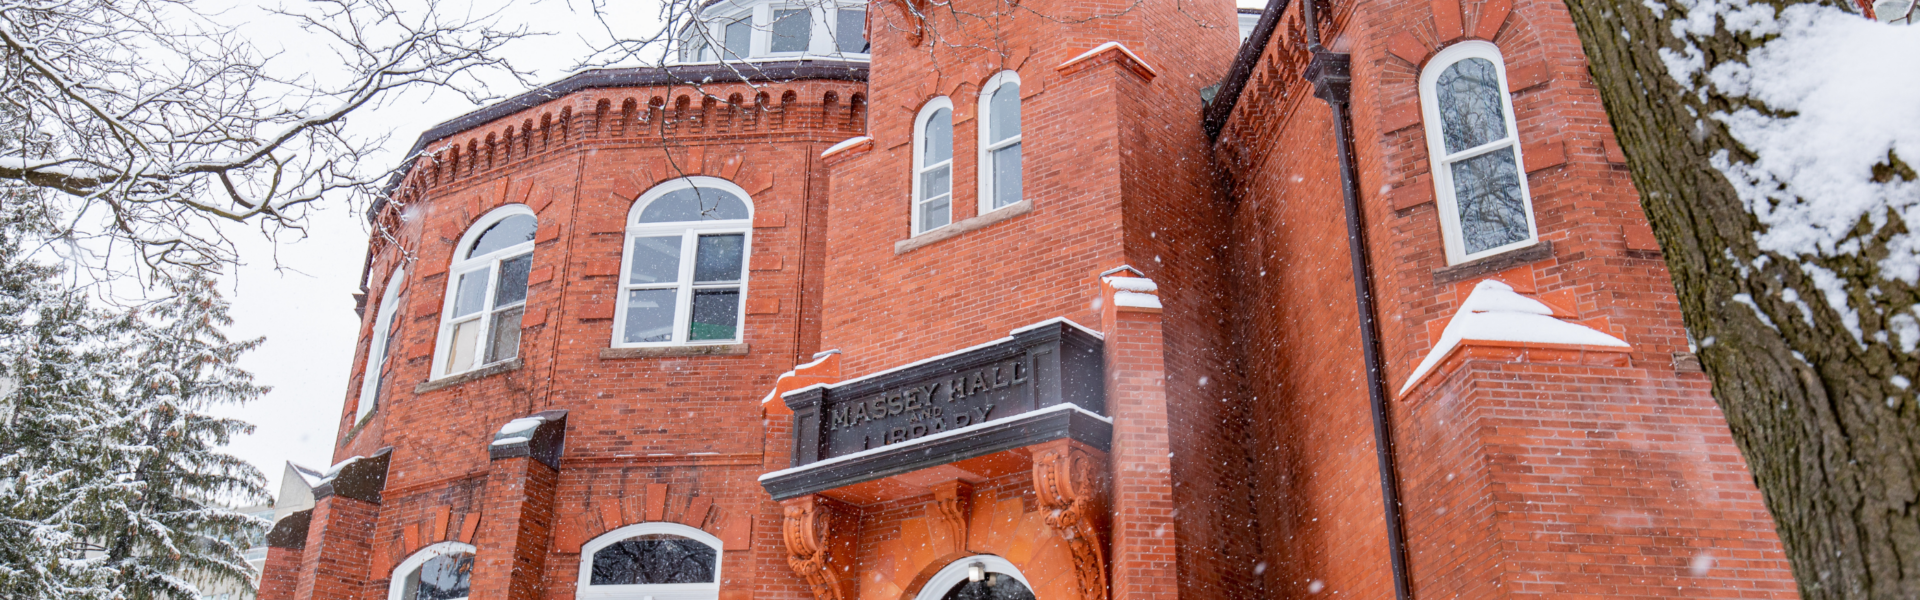 The red brick Massey hall on a snowy day.